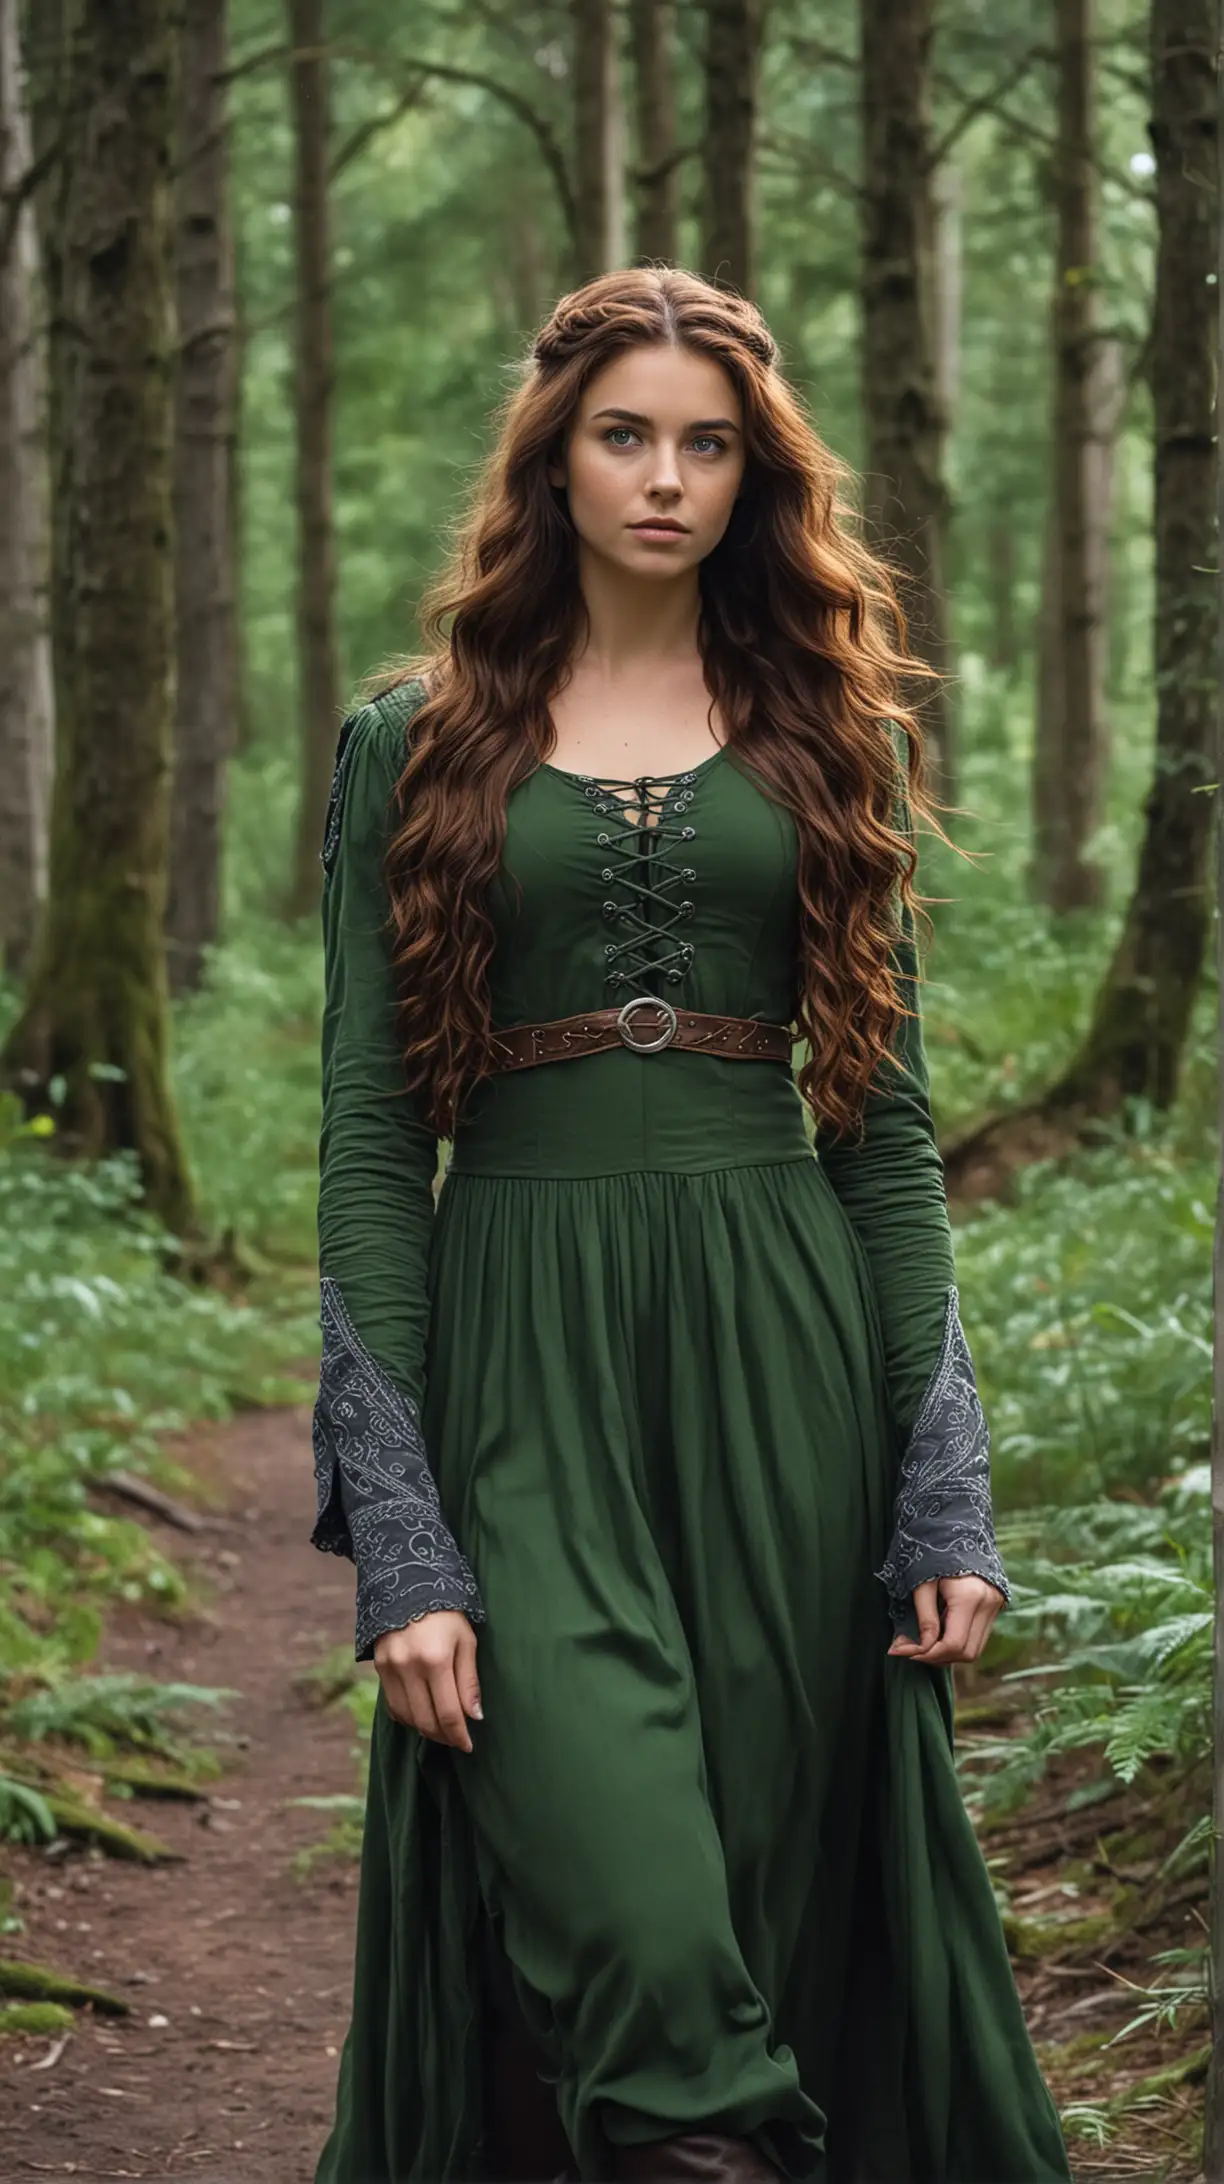 Young Woman in Vikings Dress Walking Through Enchanted Forest